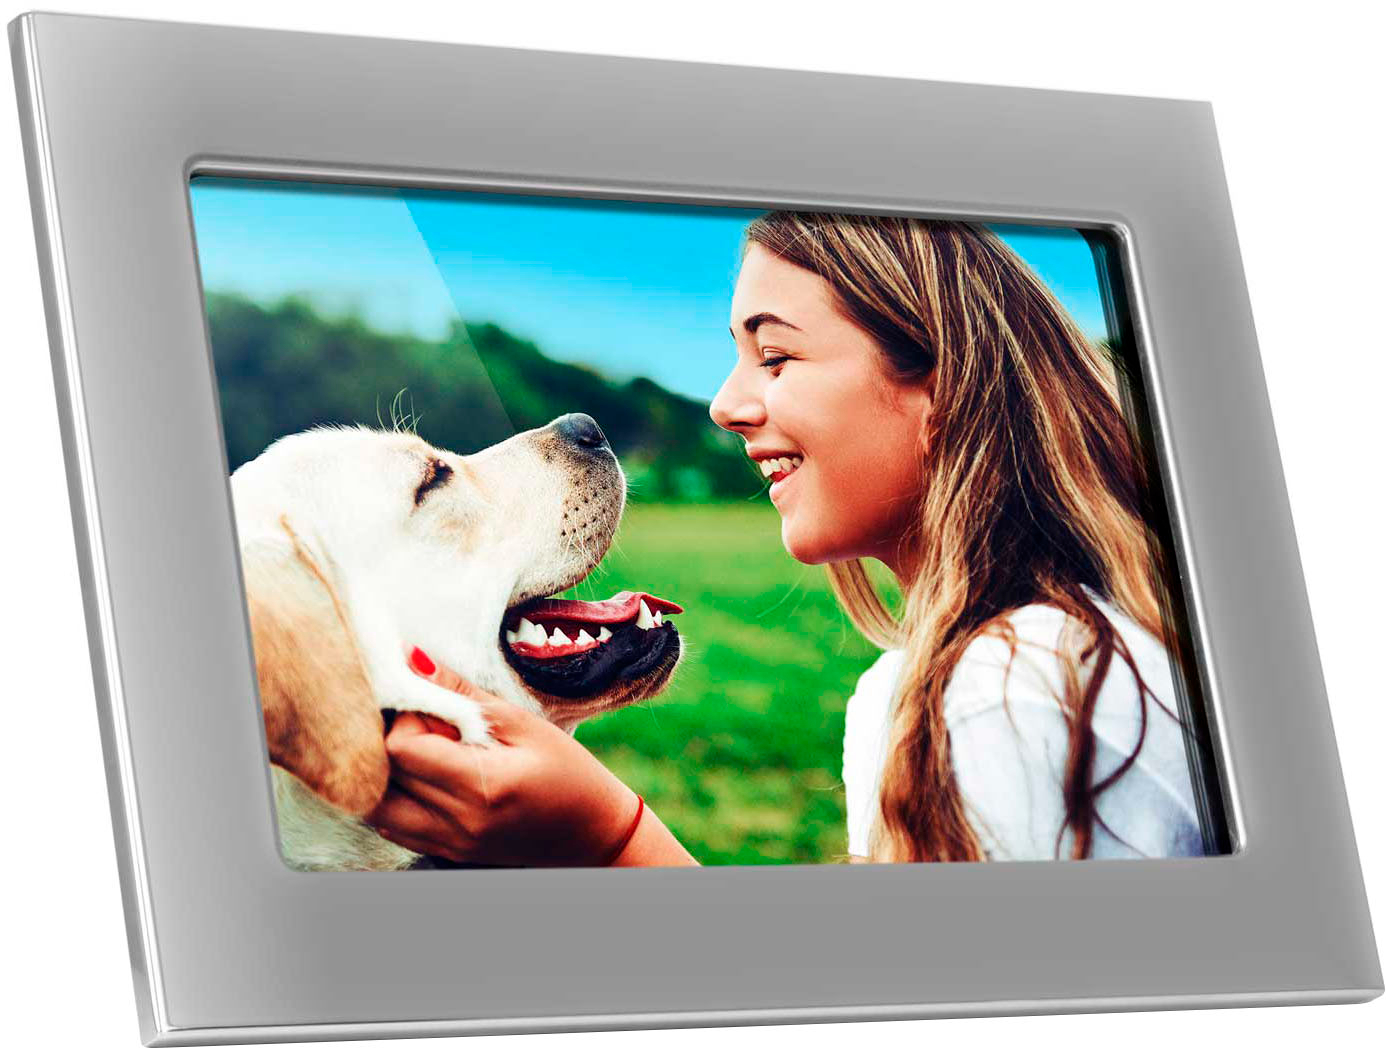 Angle View: Aluratek - 10" Touchscreen IPS LCD Wi-Fi Digital Photo Frame - Silver